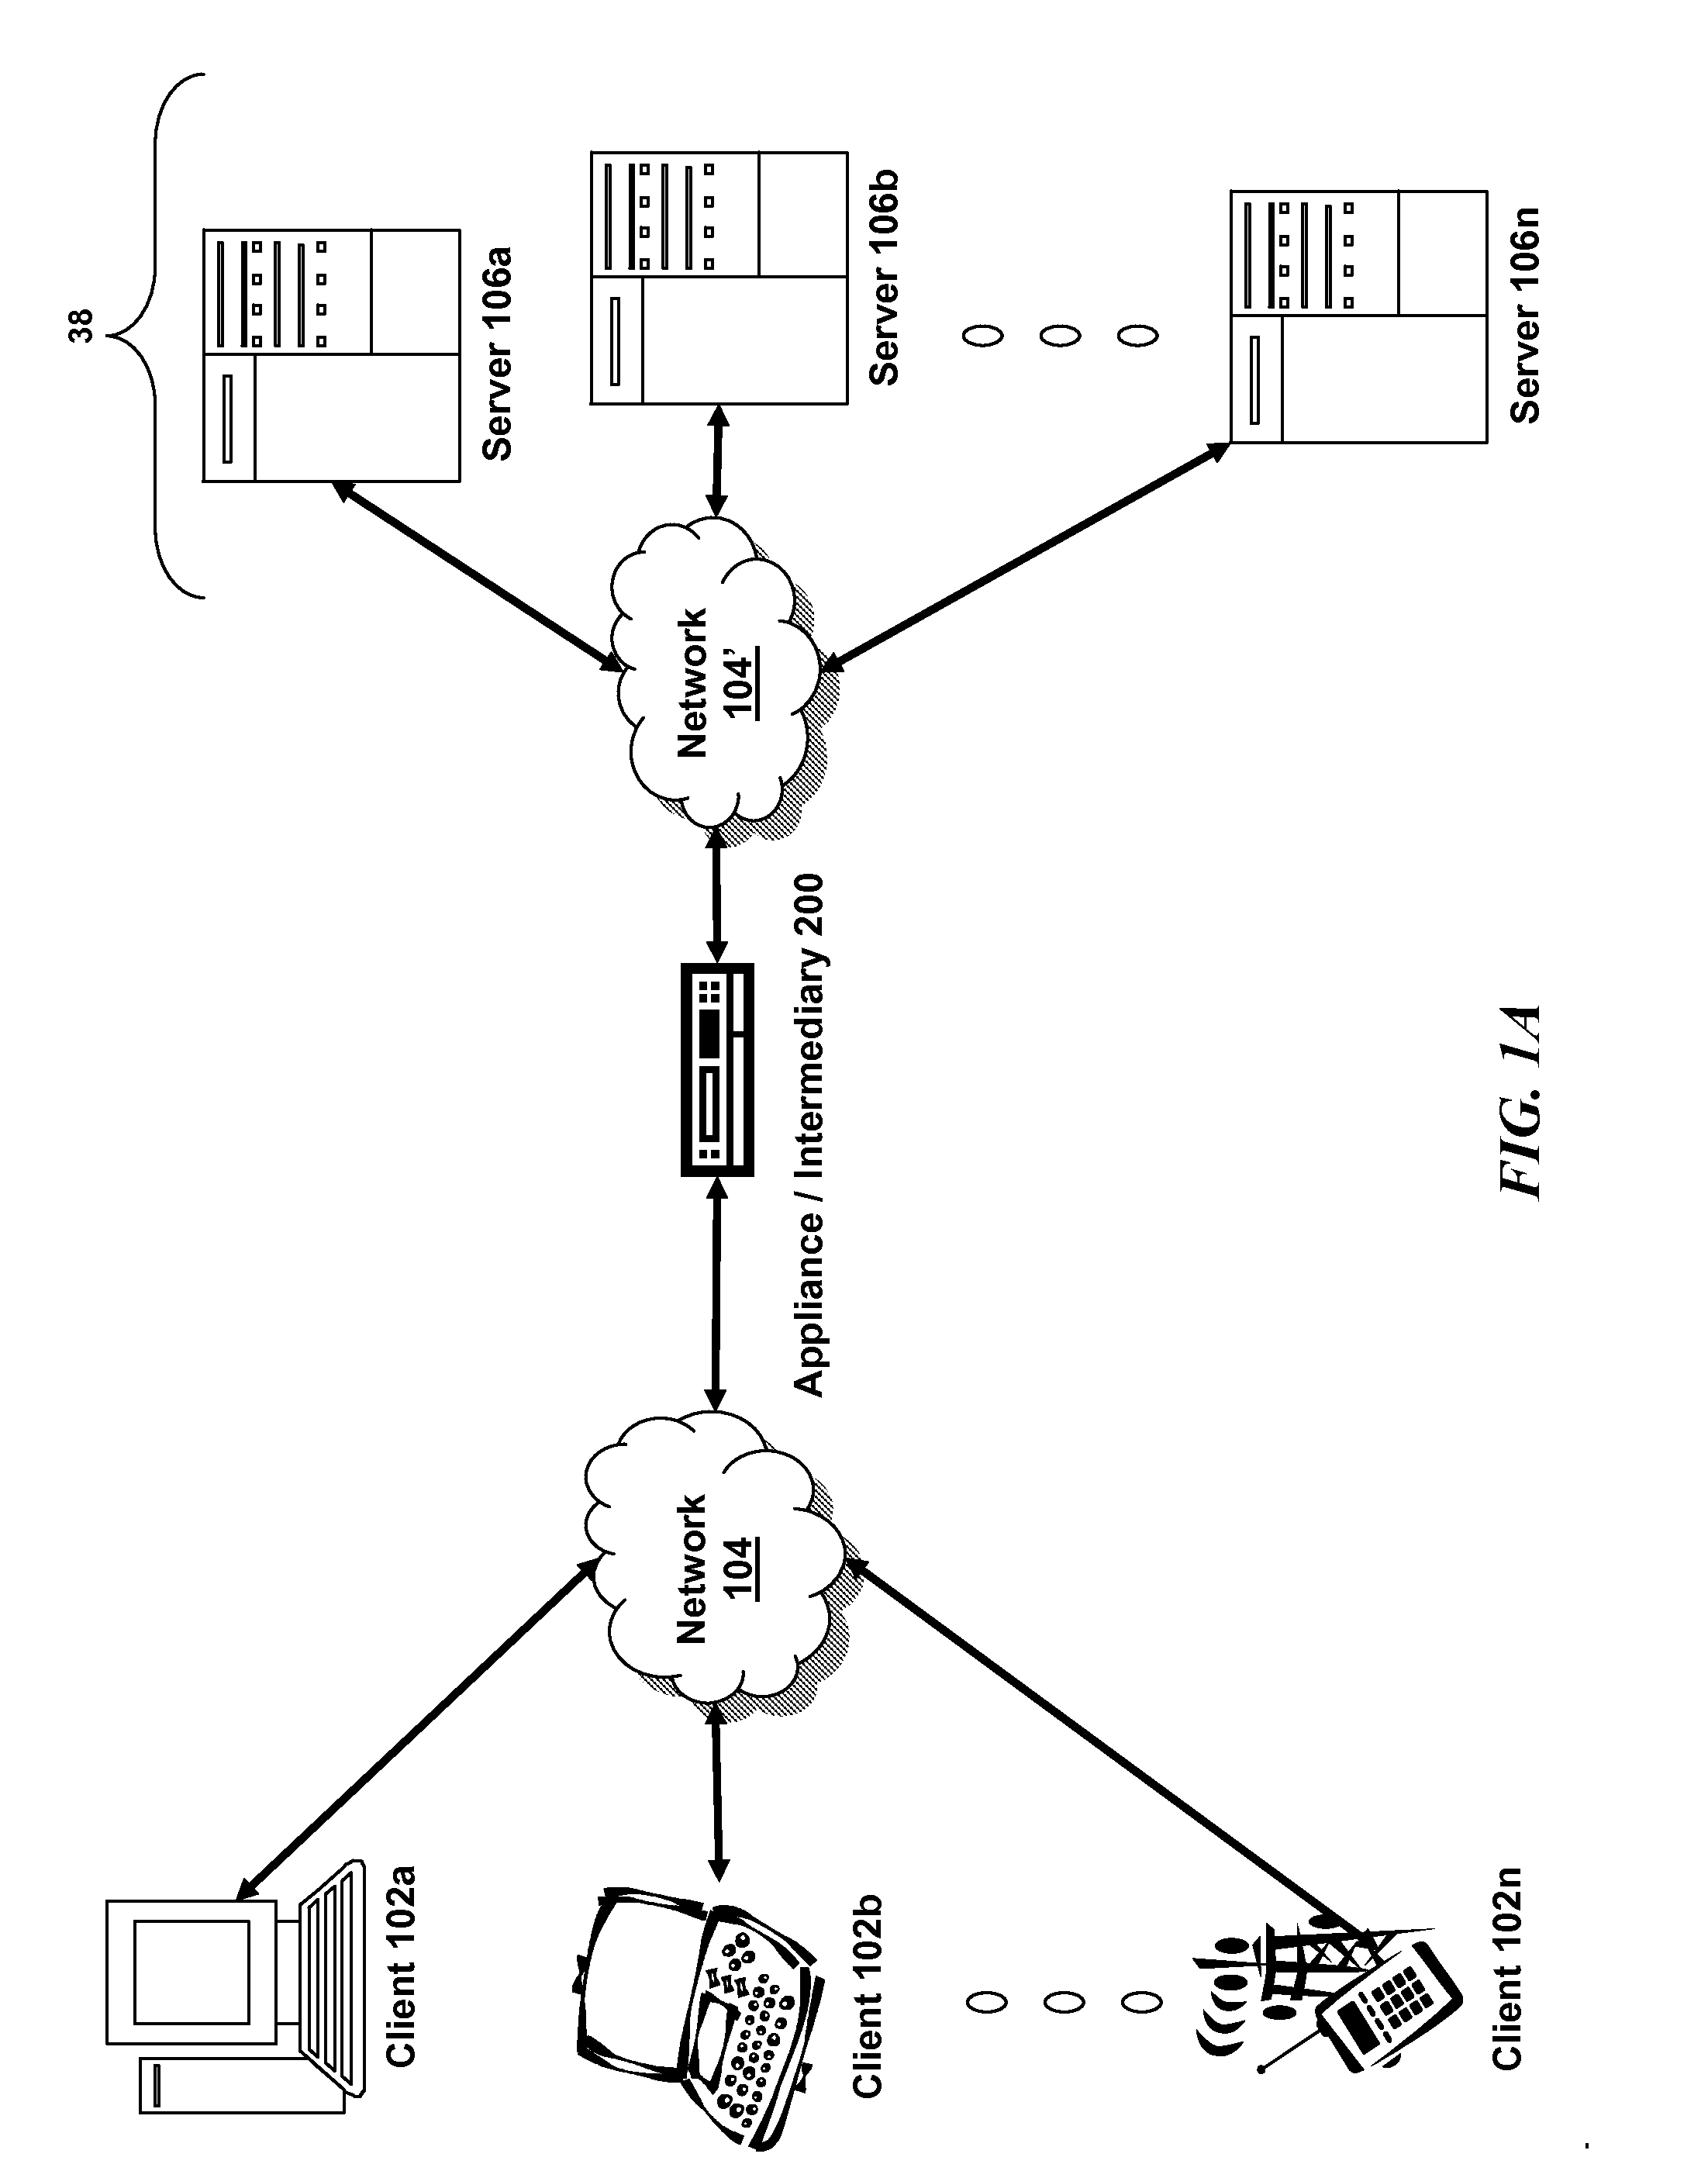 Systems and methods for gslb mep connection management across multiple core appliances